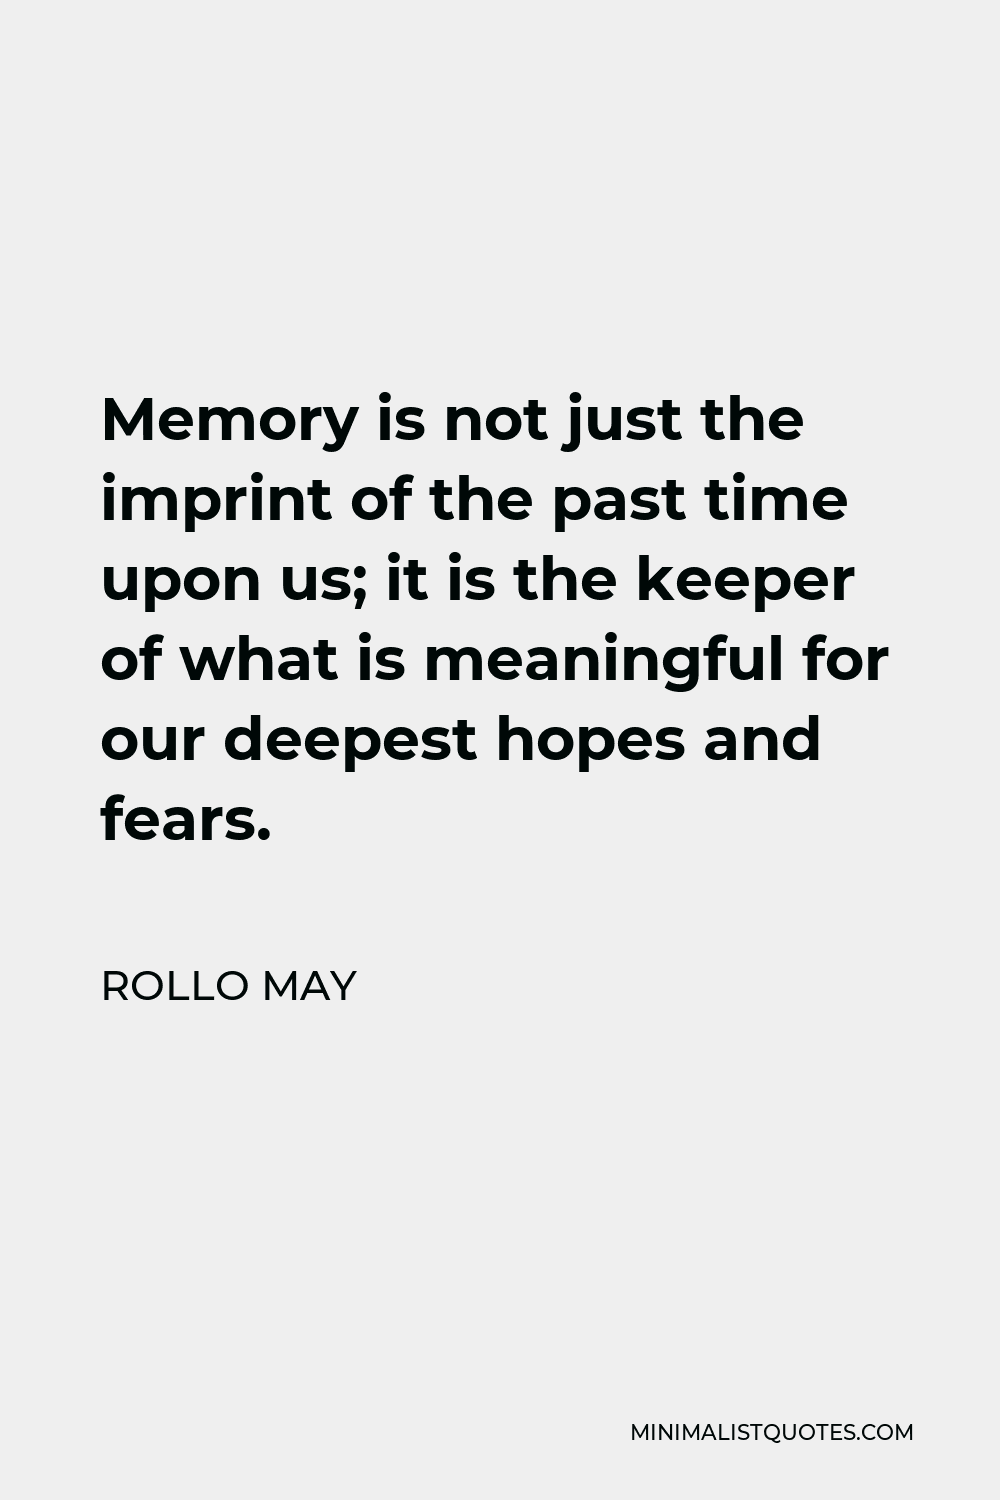 Rollo May Quote - Memory is not just the imprint of the past time upon us; it is the keeper of what is meaningful for our deepest hopes and fears.